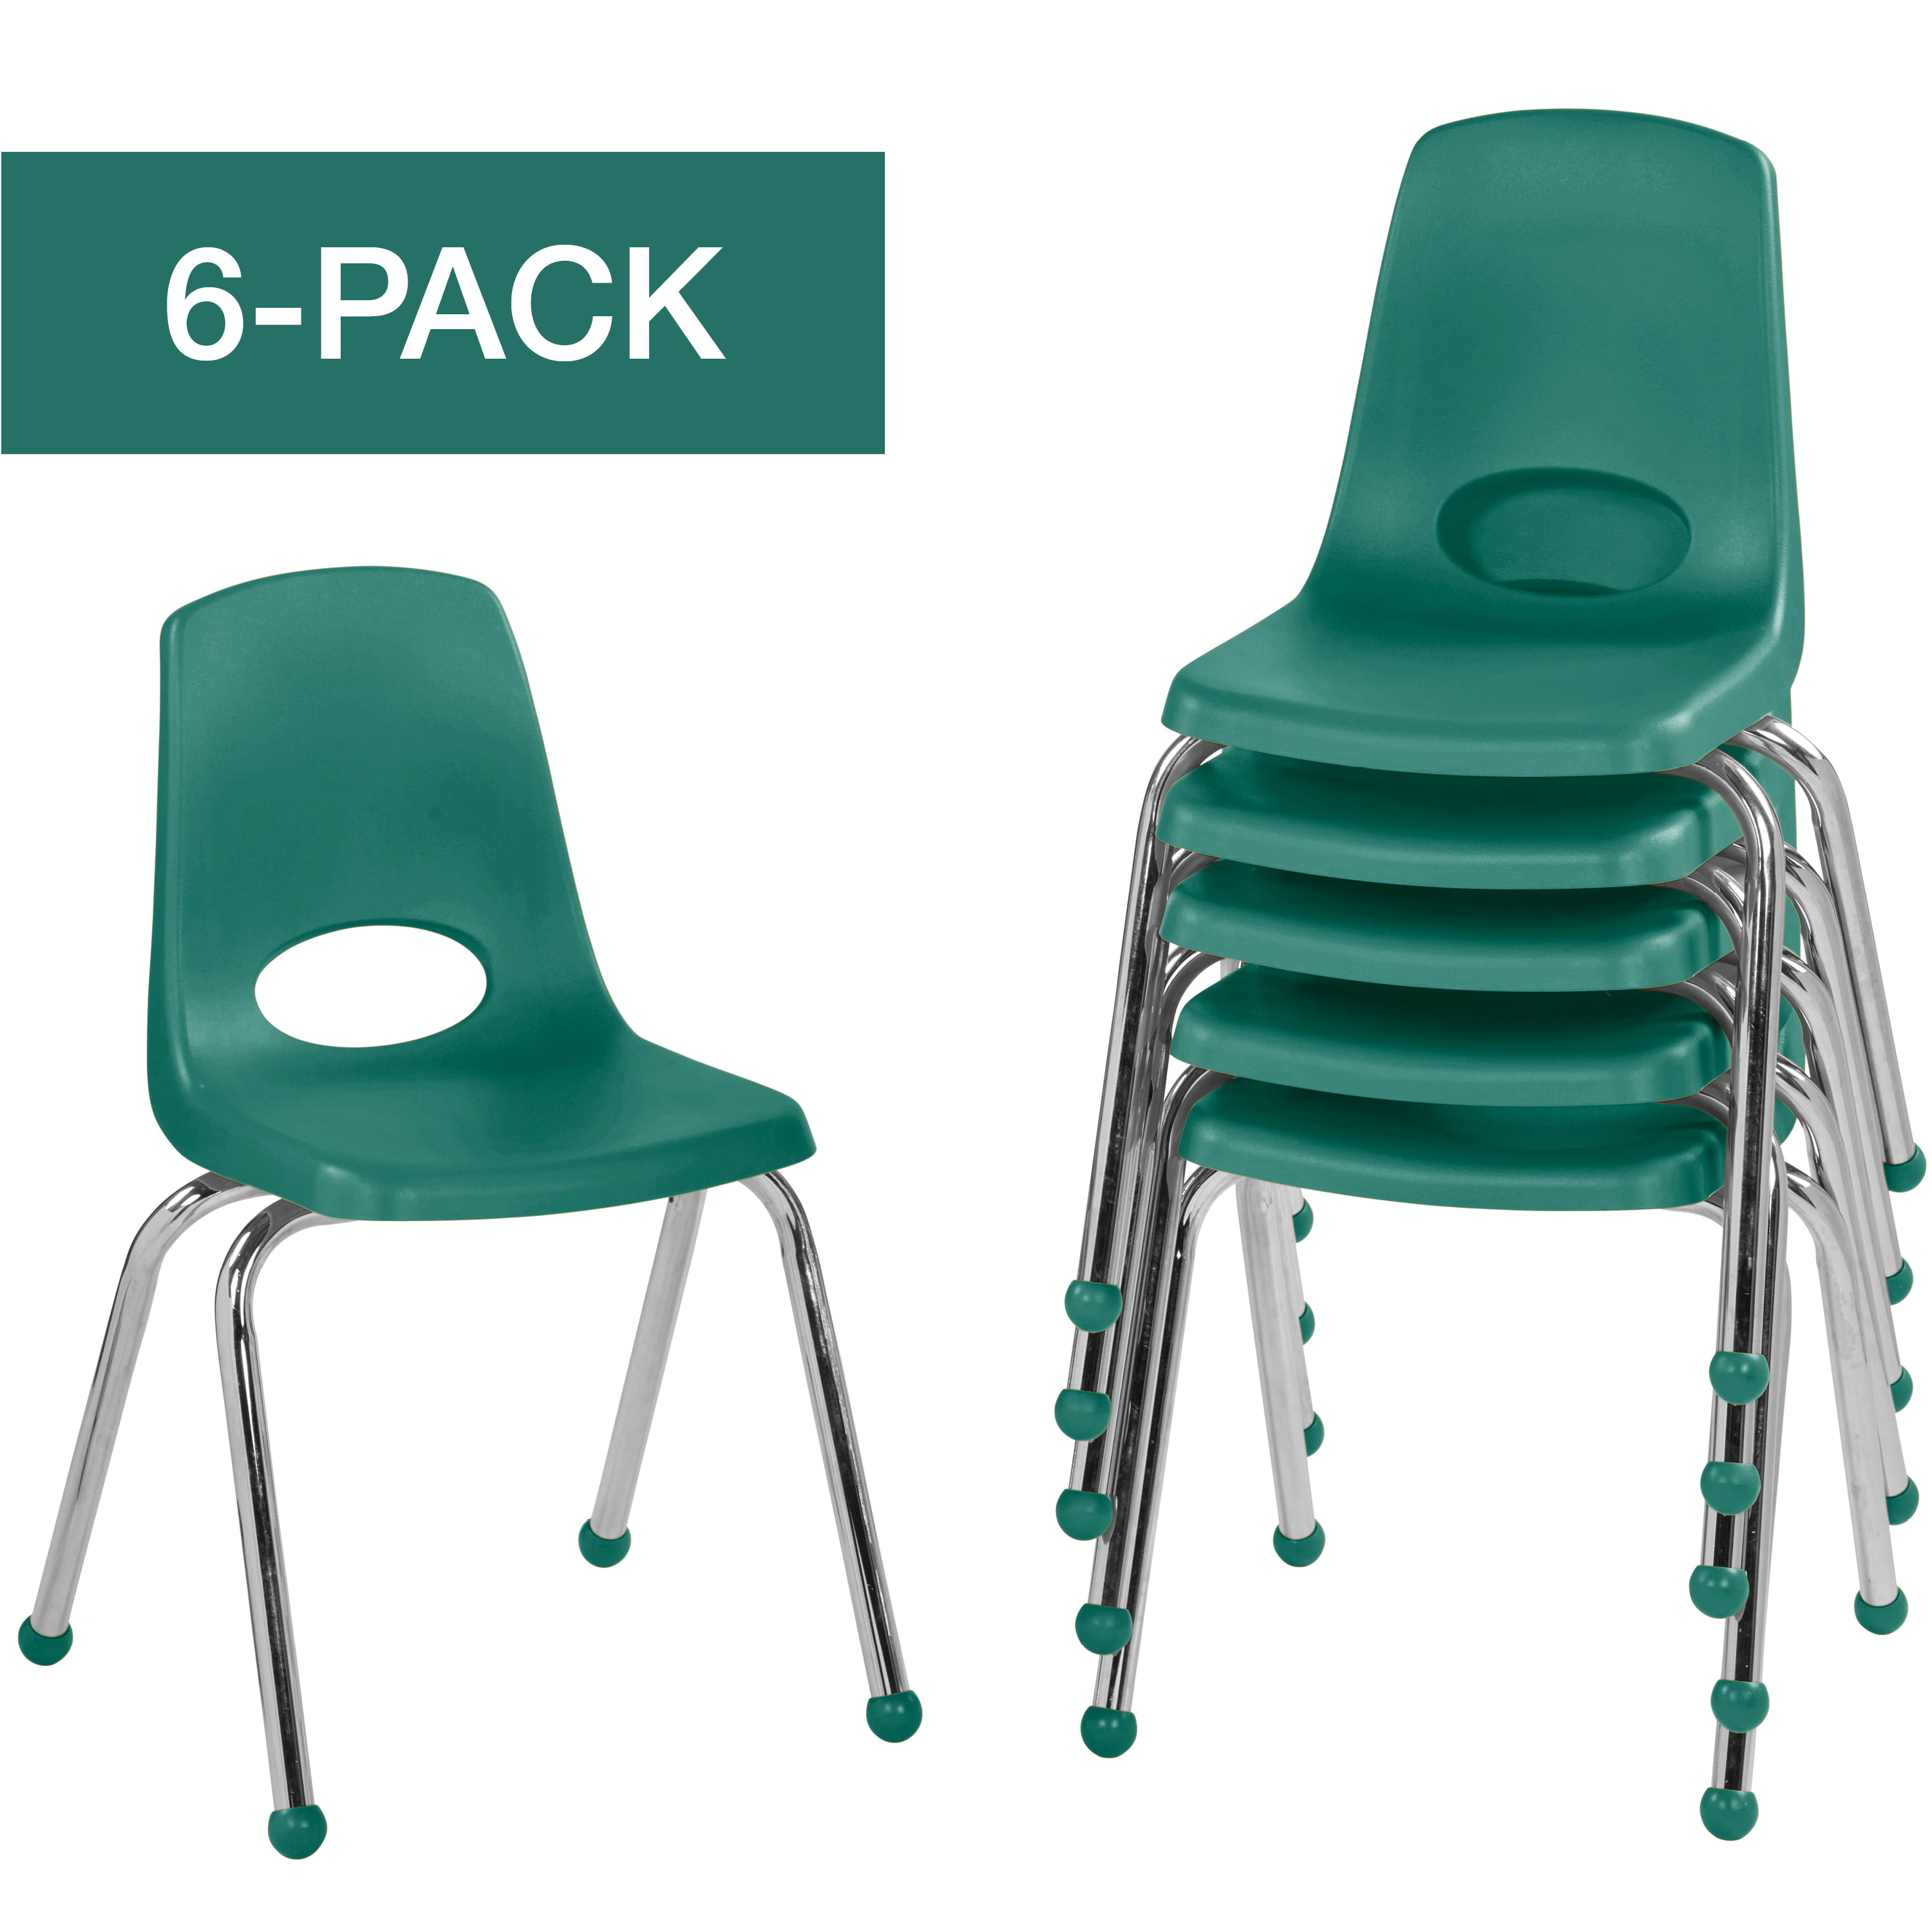 ECR4Kids 16 School Stack Chair 6-Pack Chrome Legs with Ball Glides Green 